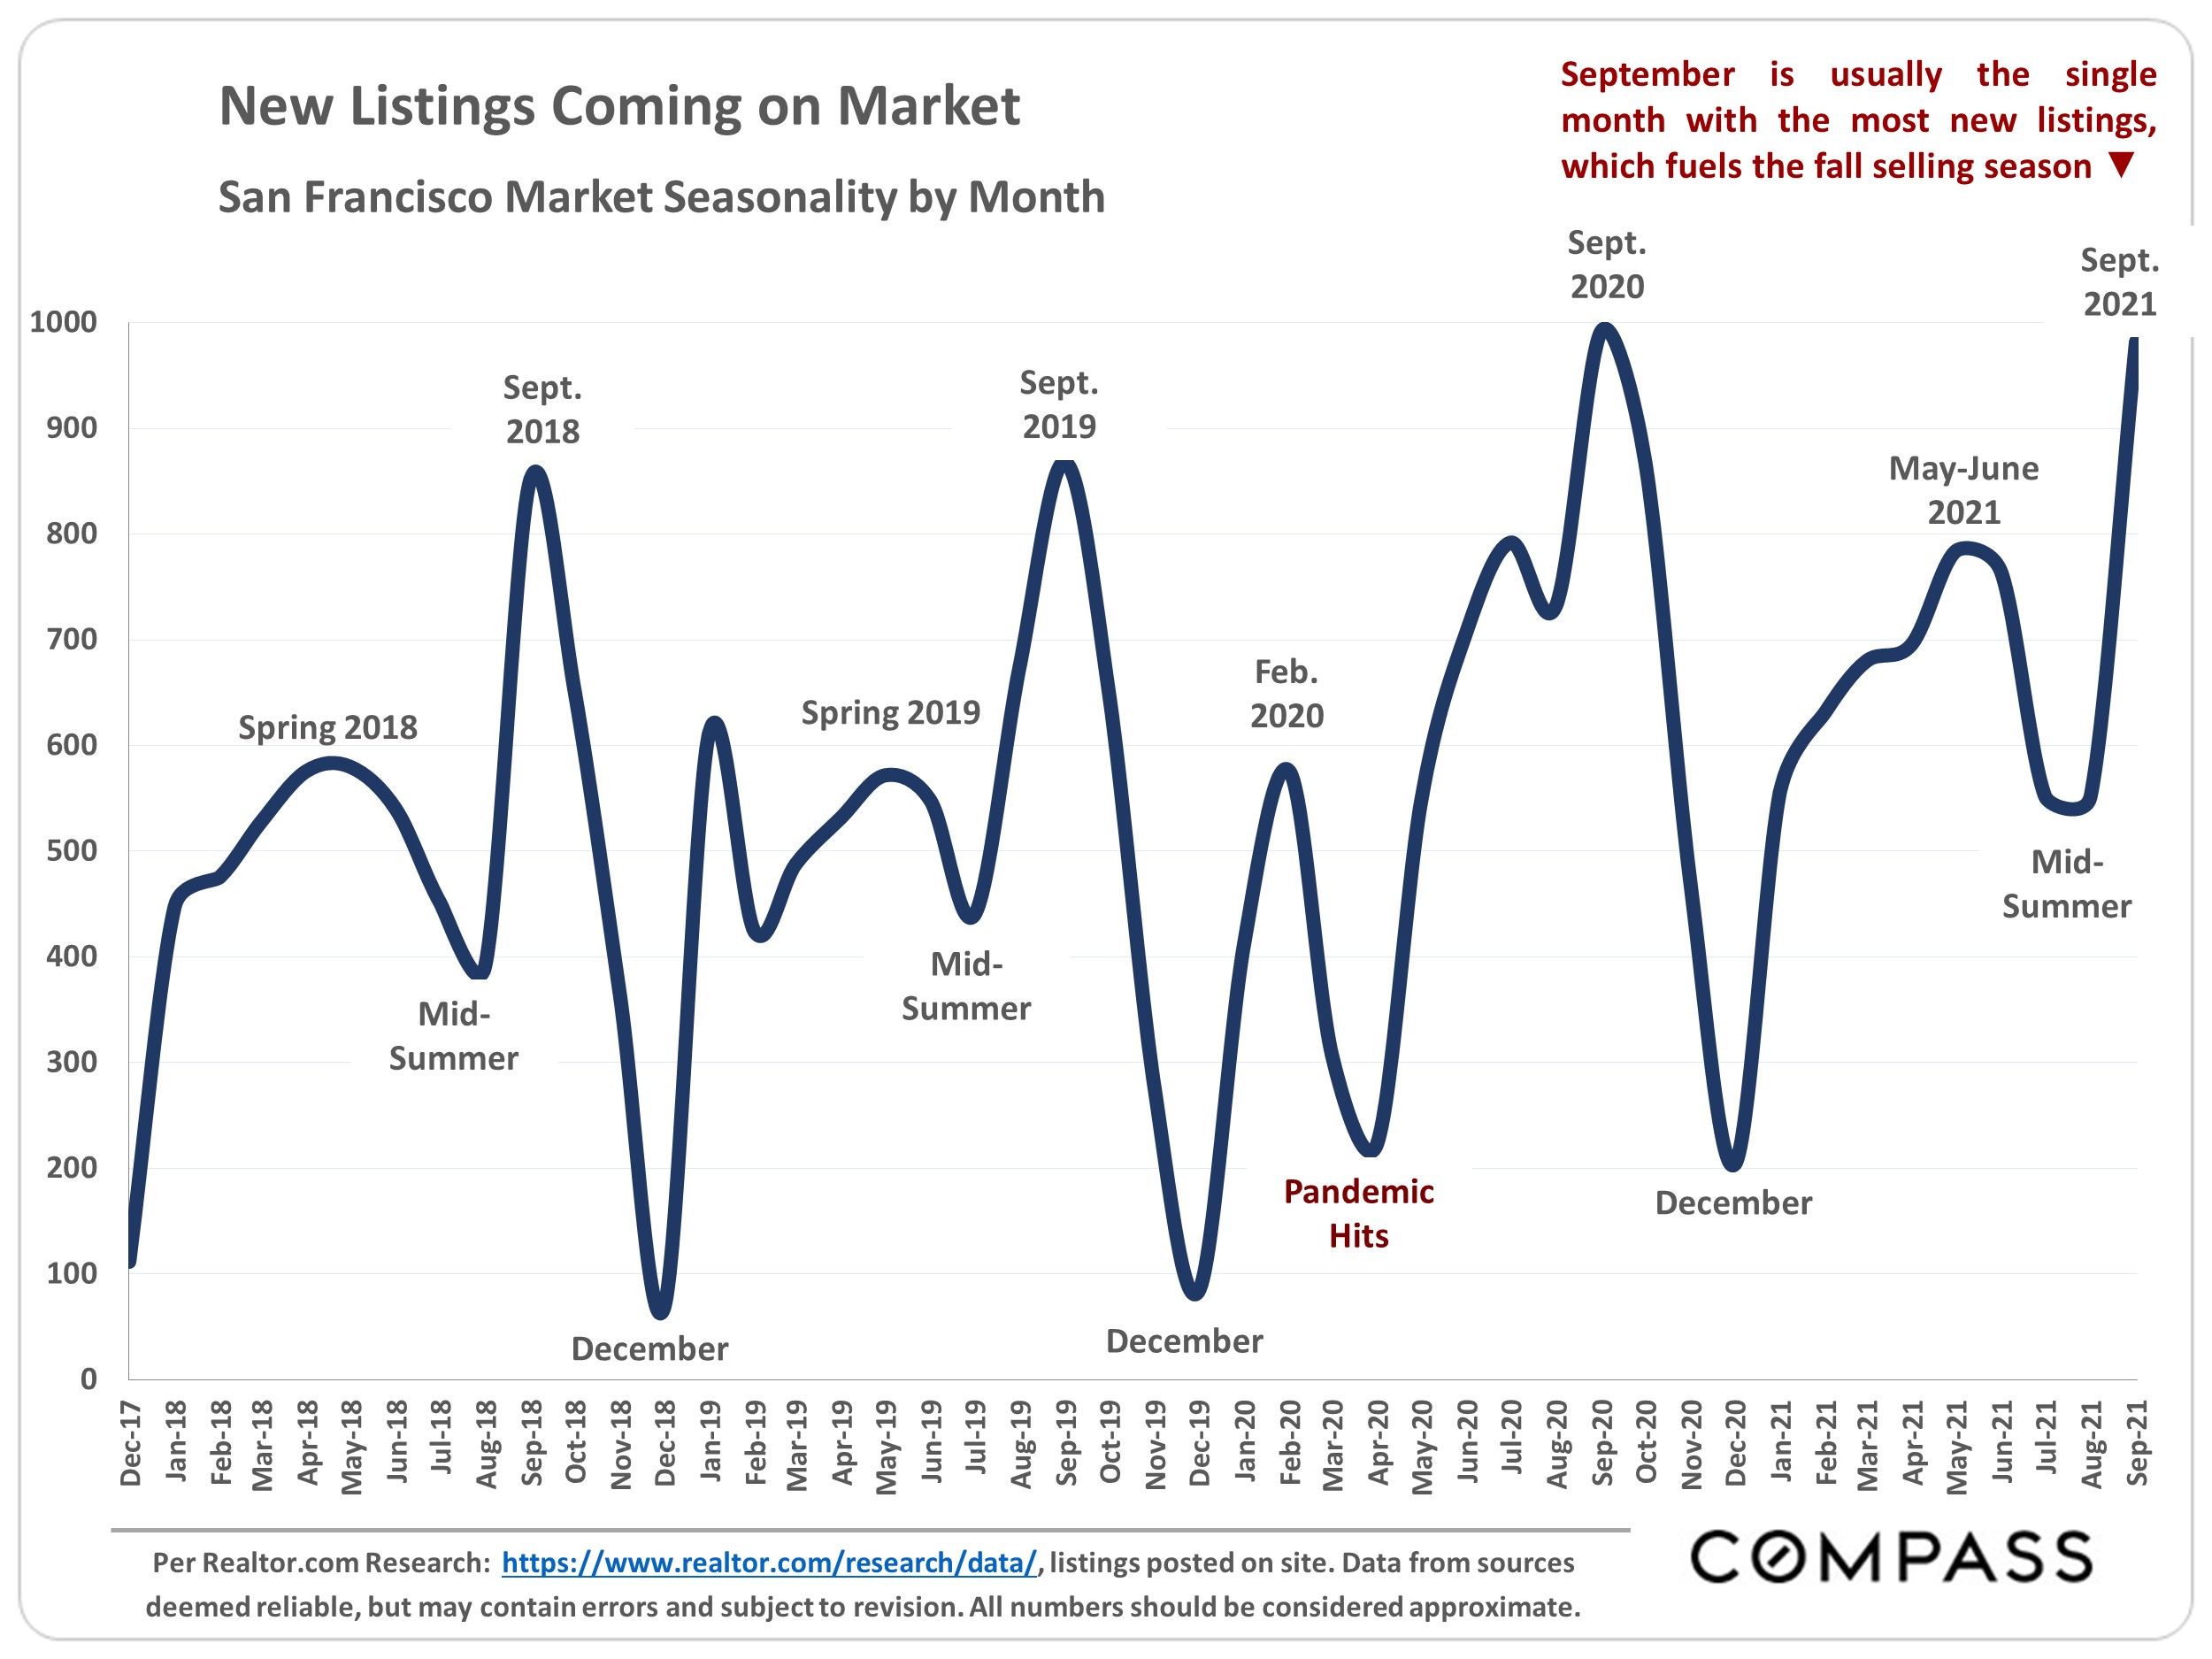 Graph showing listing spikes in September months